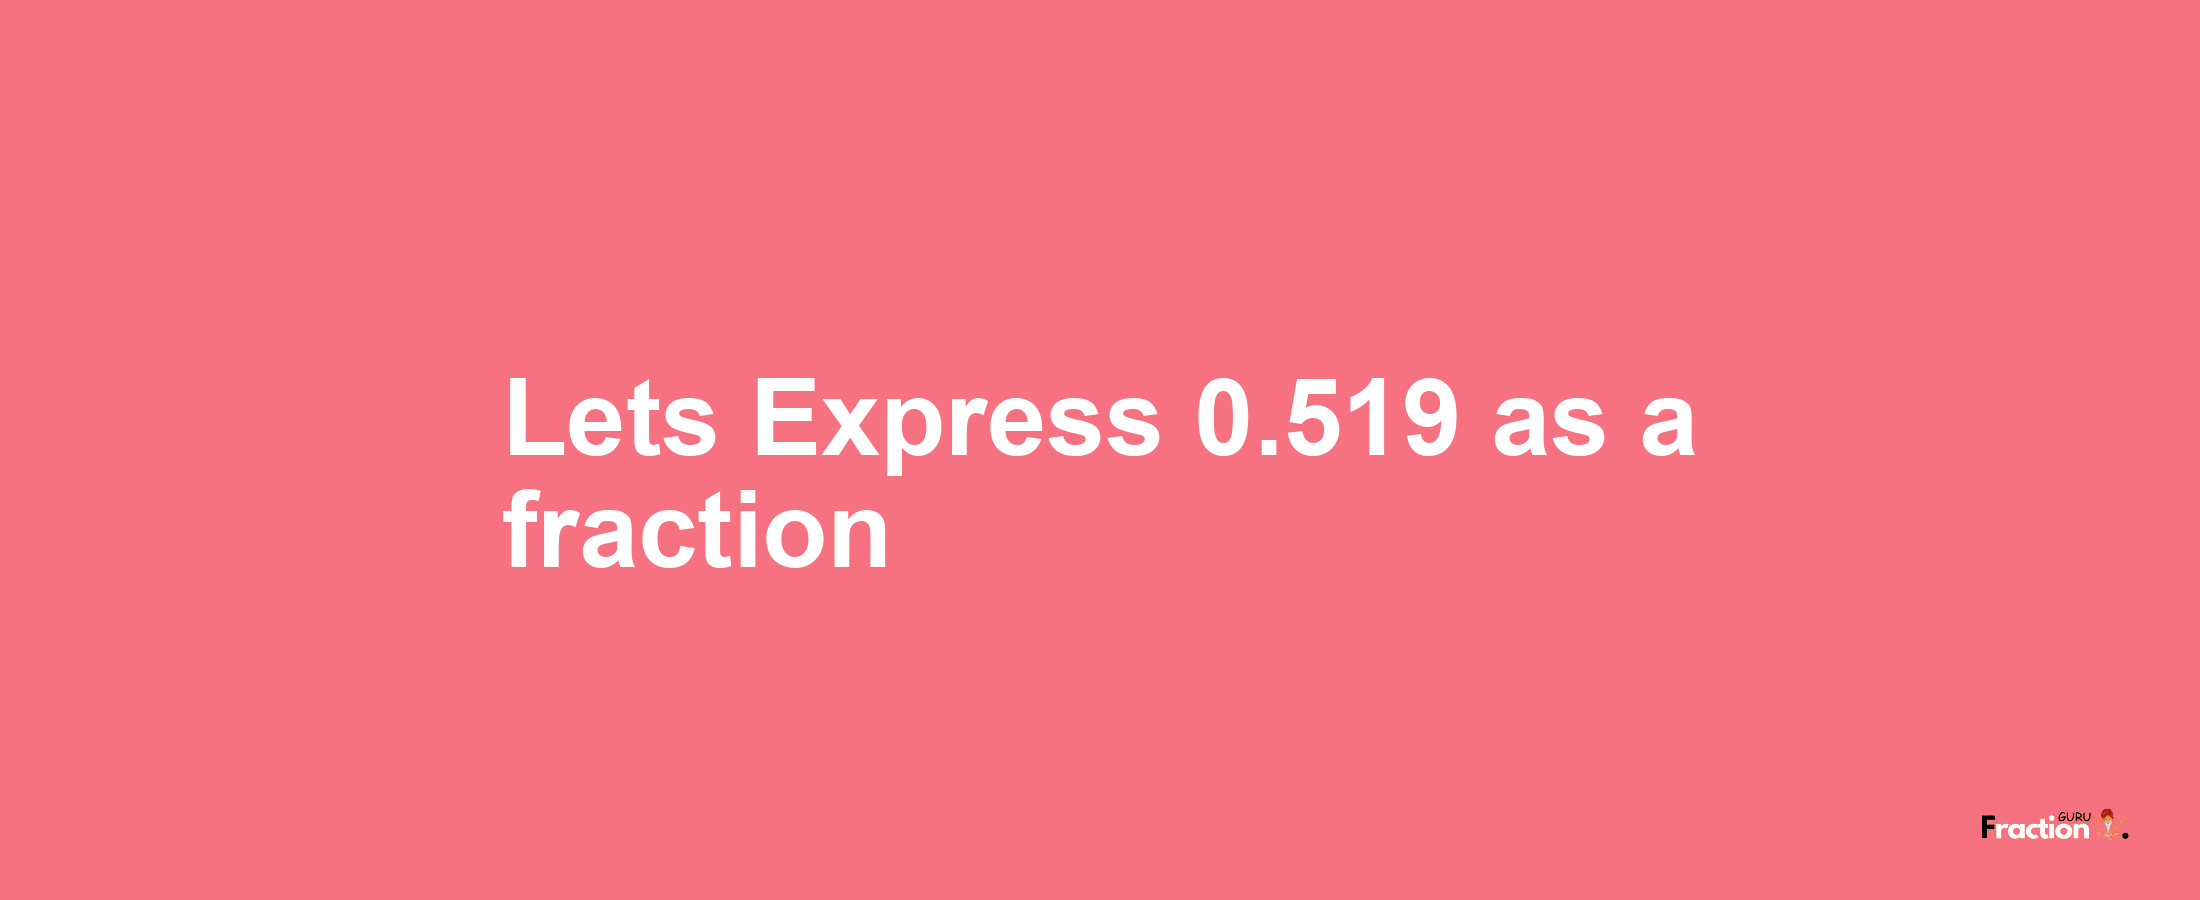 Lets Express 0.519 as afraction